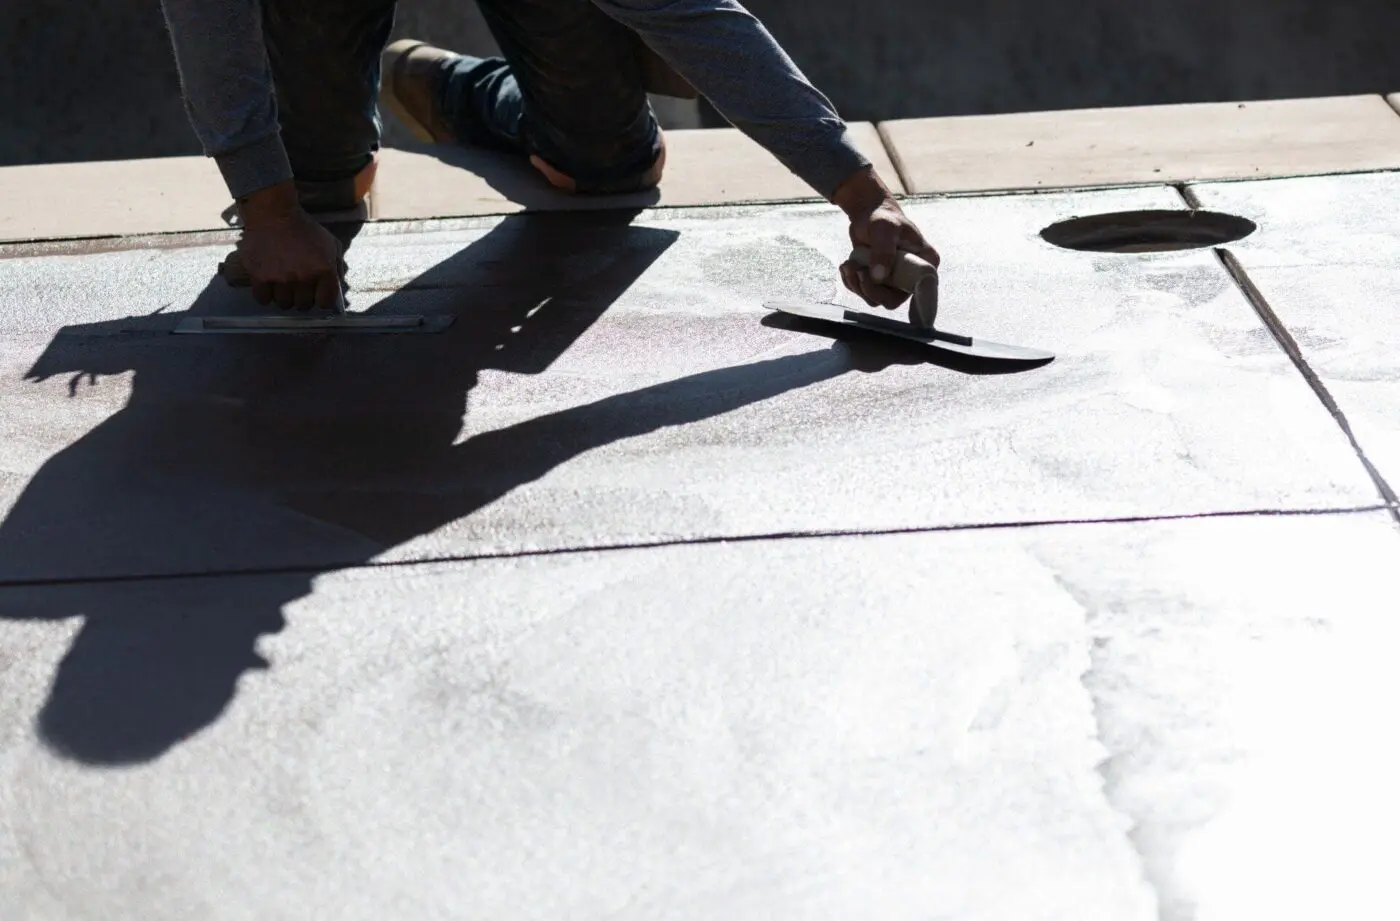 A person troweling smooth concrete with tools, casting a shadow over the slab. The individual, representing Dade Decorative Concrete, wears a long-sleeved shirt and kneels to apply even pressure, ensuring a flat and consistent surface. The scene is lit with sunlight, creating strong contrast and shadows.